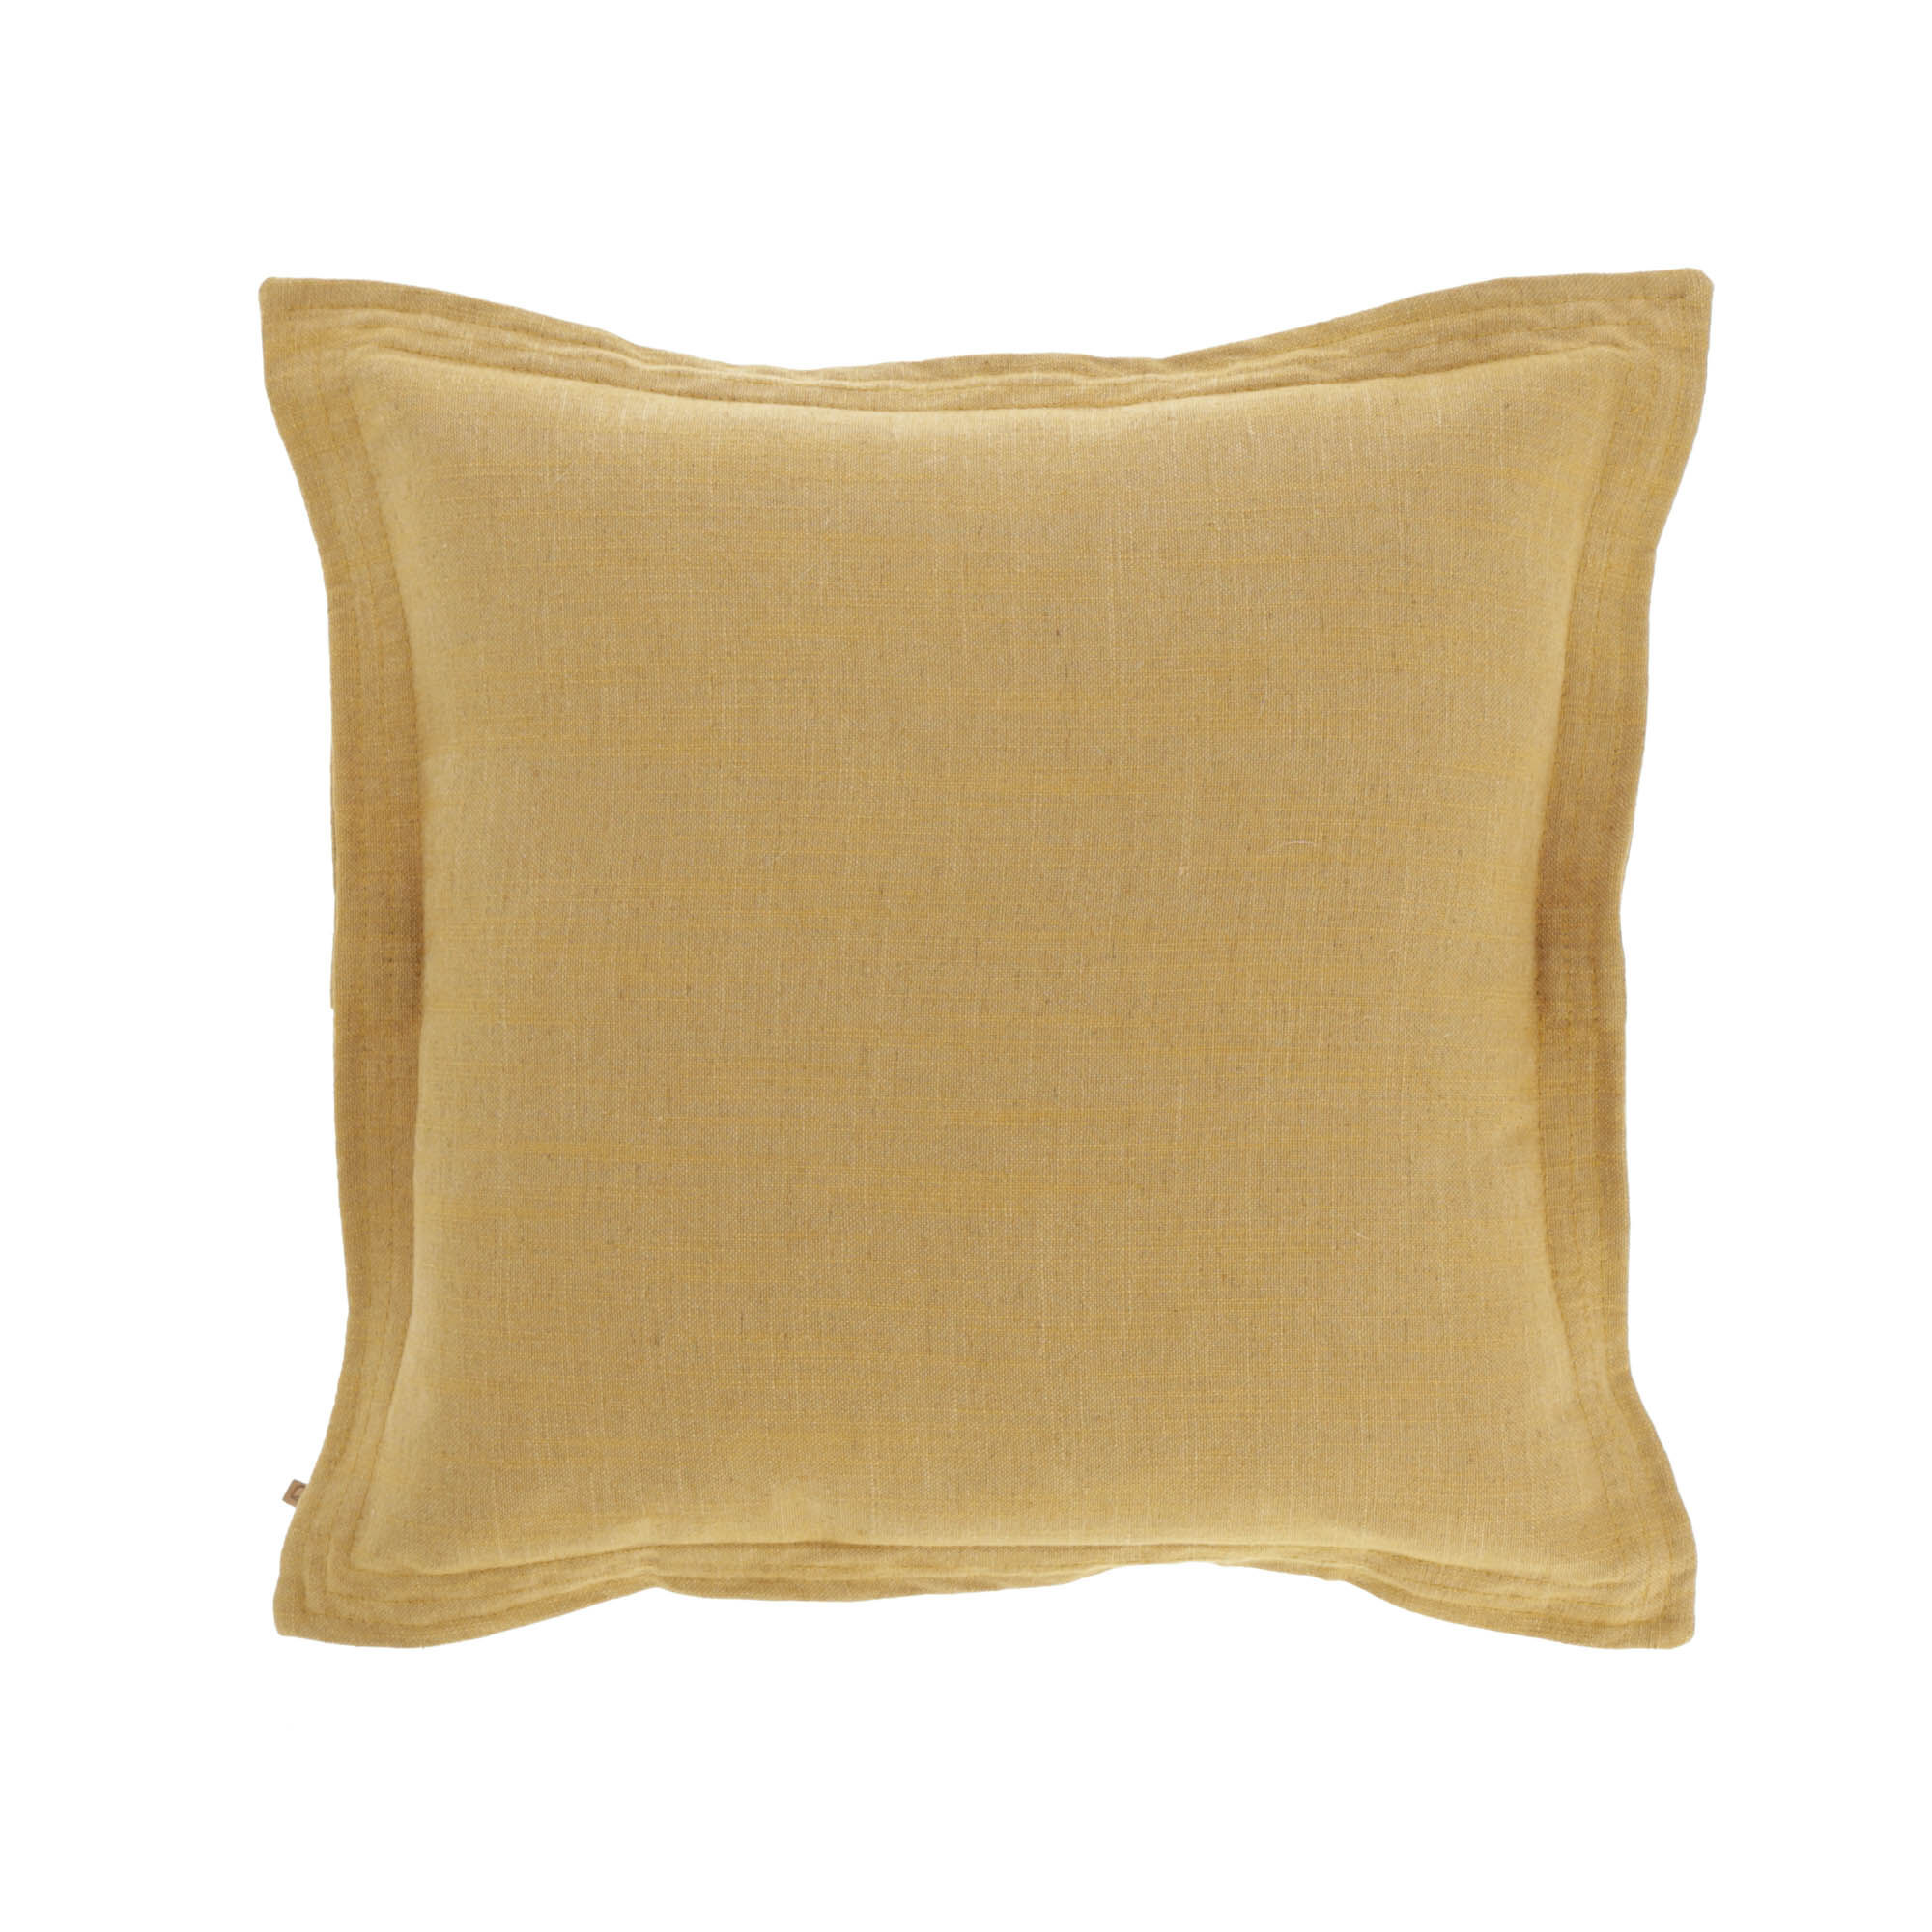 Kave Home - Kussenhoes Maelina 45 x 45 cm mosterd